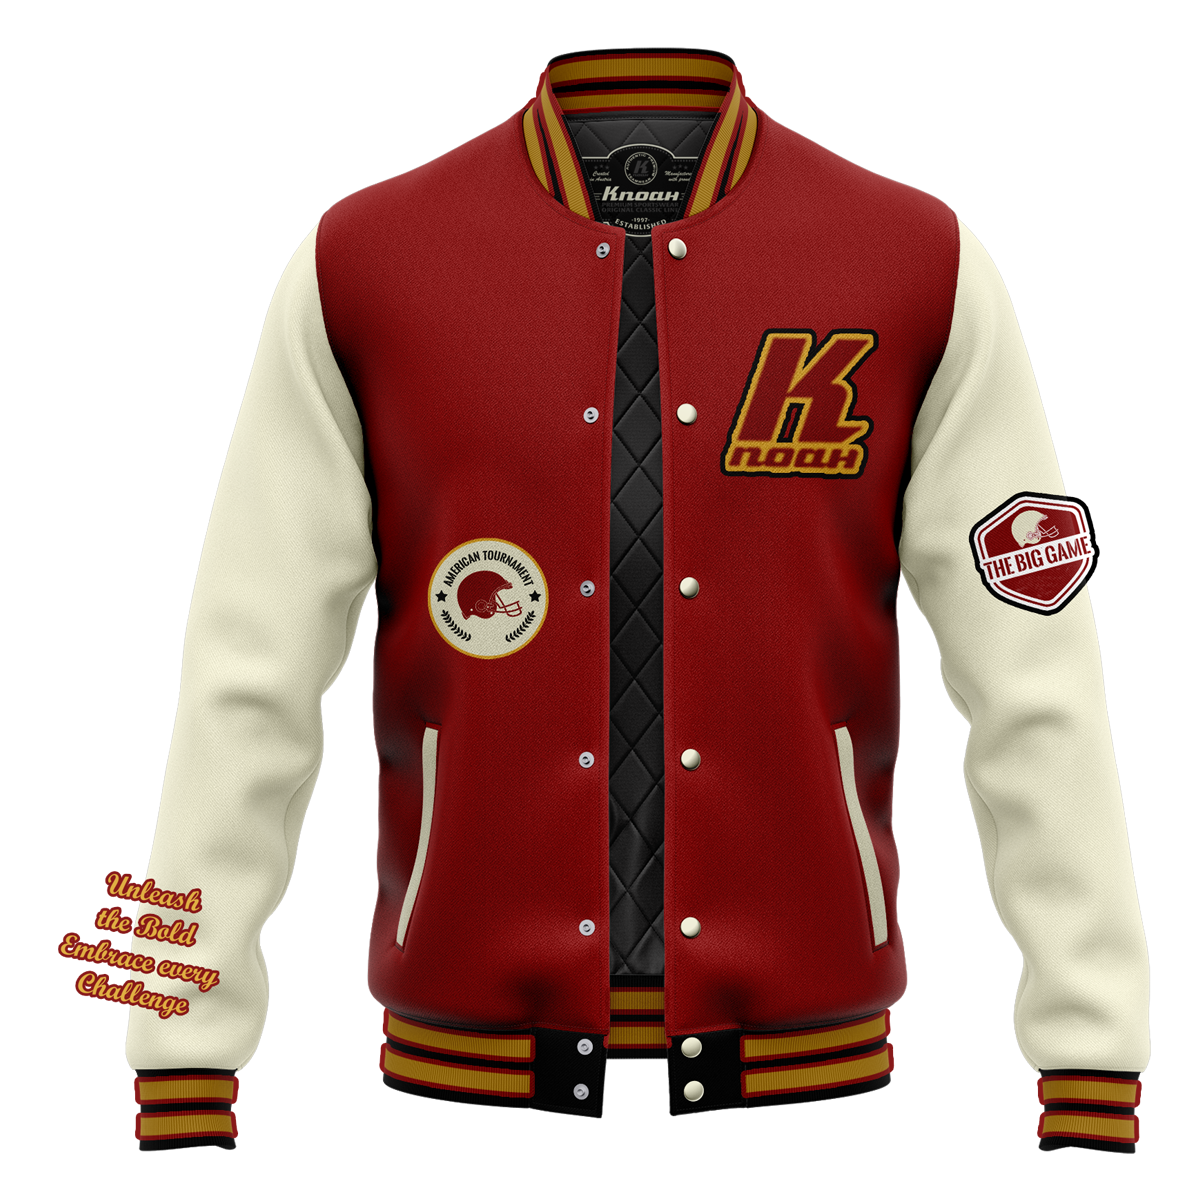 Day 9: "The big Game" Authentic Varsity Jacket